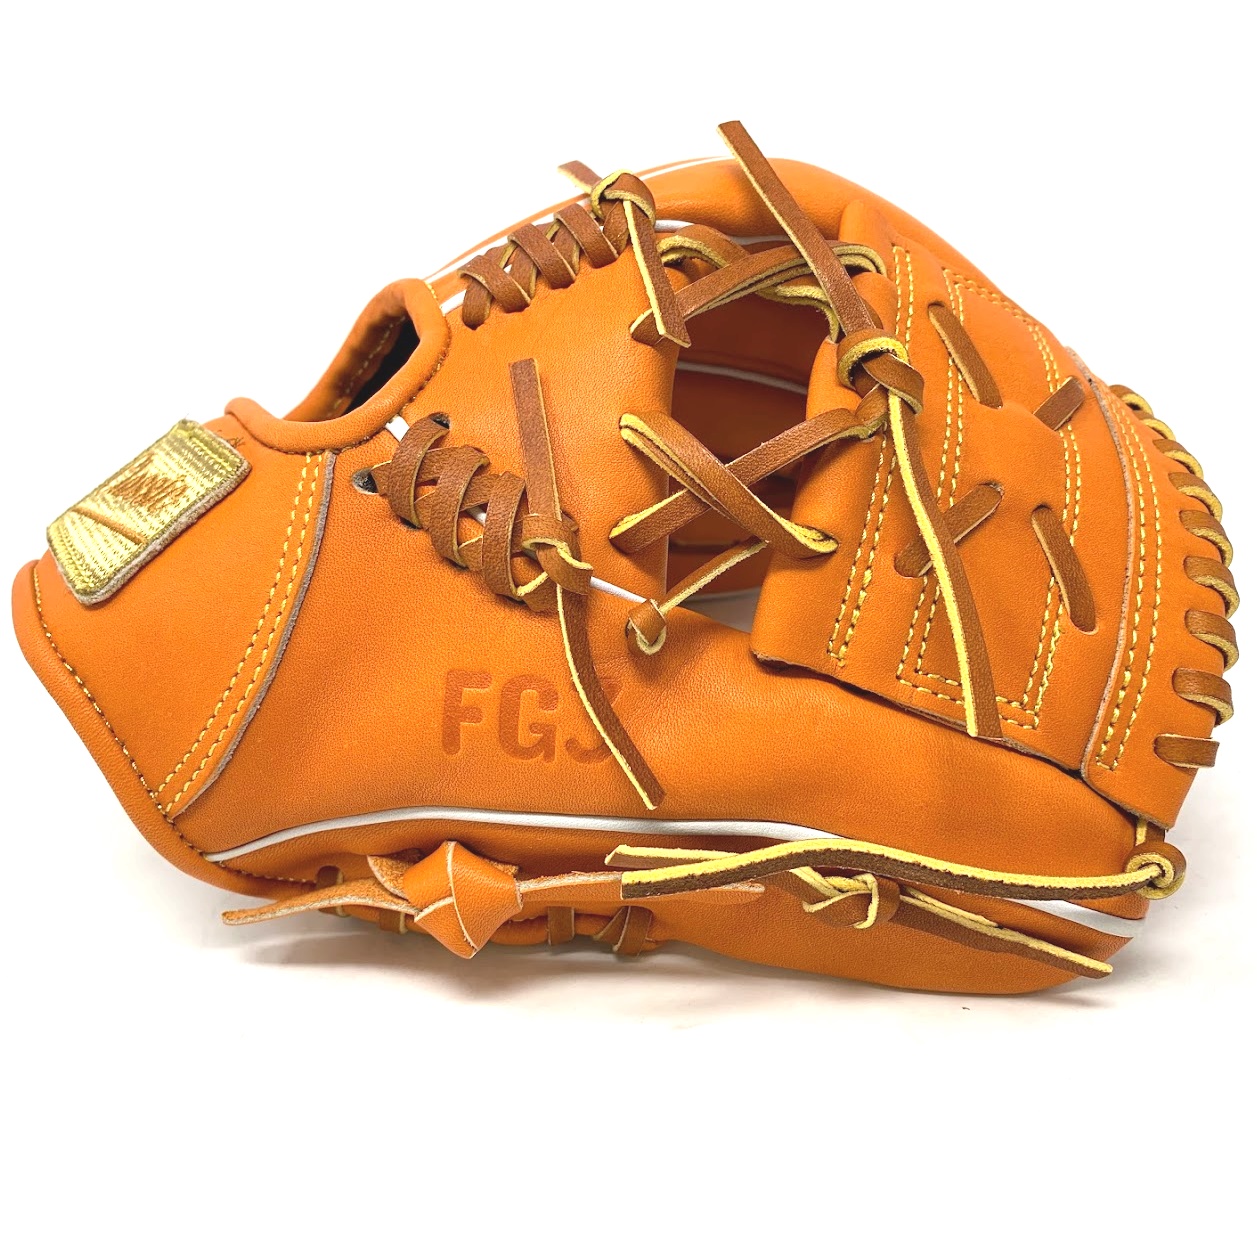 classic-baseball-glove-11-inch-one-piece-web-orange-right-hand-throw FG3-11-ORT-RightHandThrow   This classic small 11 inch baseball glove is made with orange